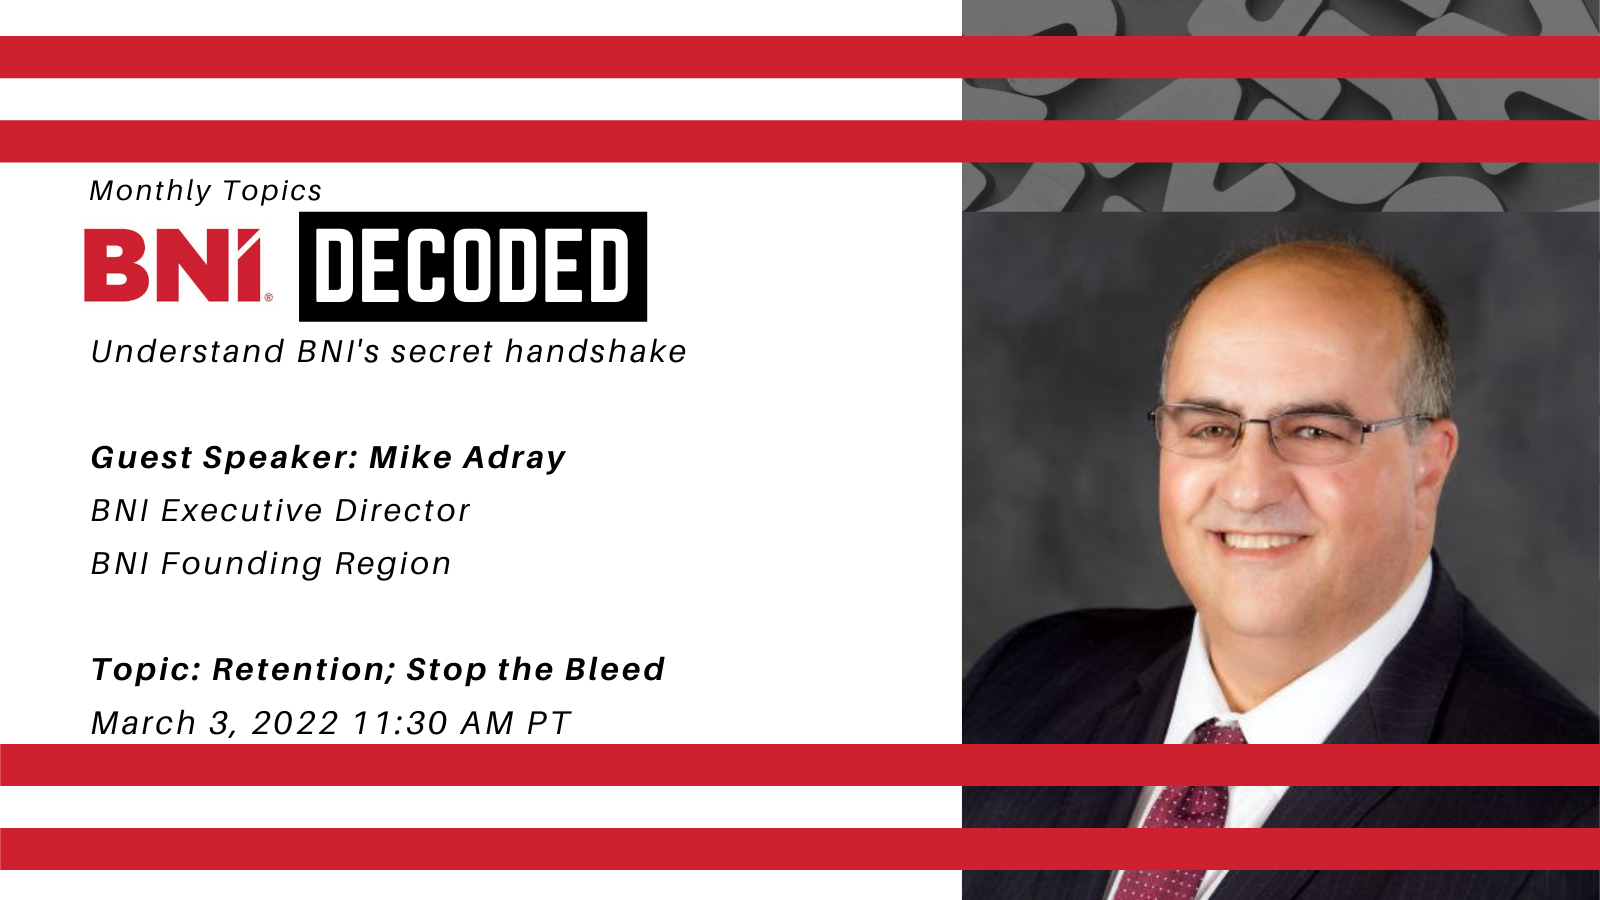 Retention: Stop The Bleed, with Mike Adray BNI Founding Region – Podcast 25